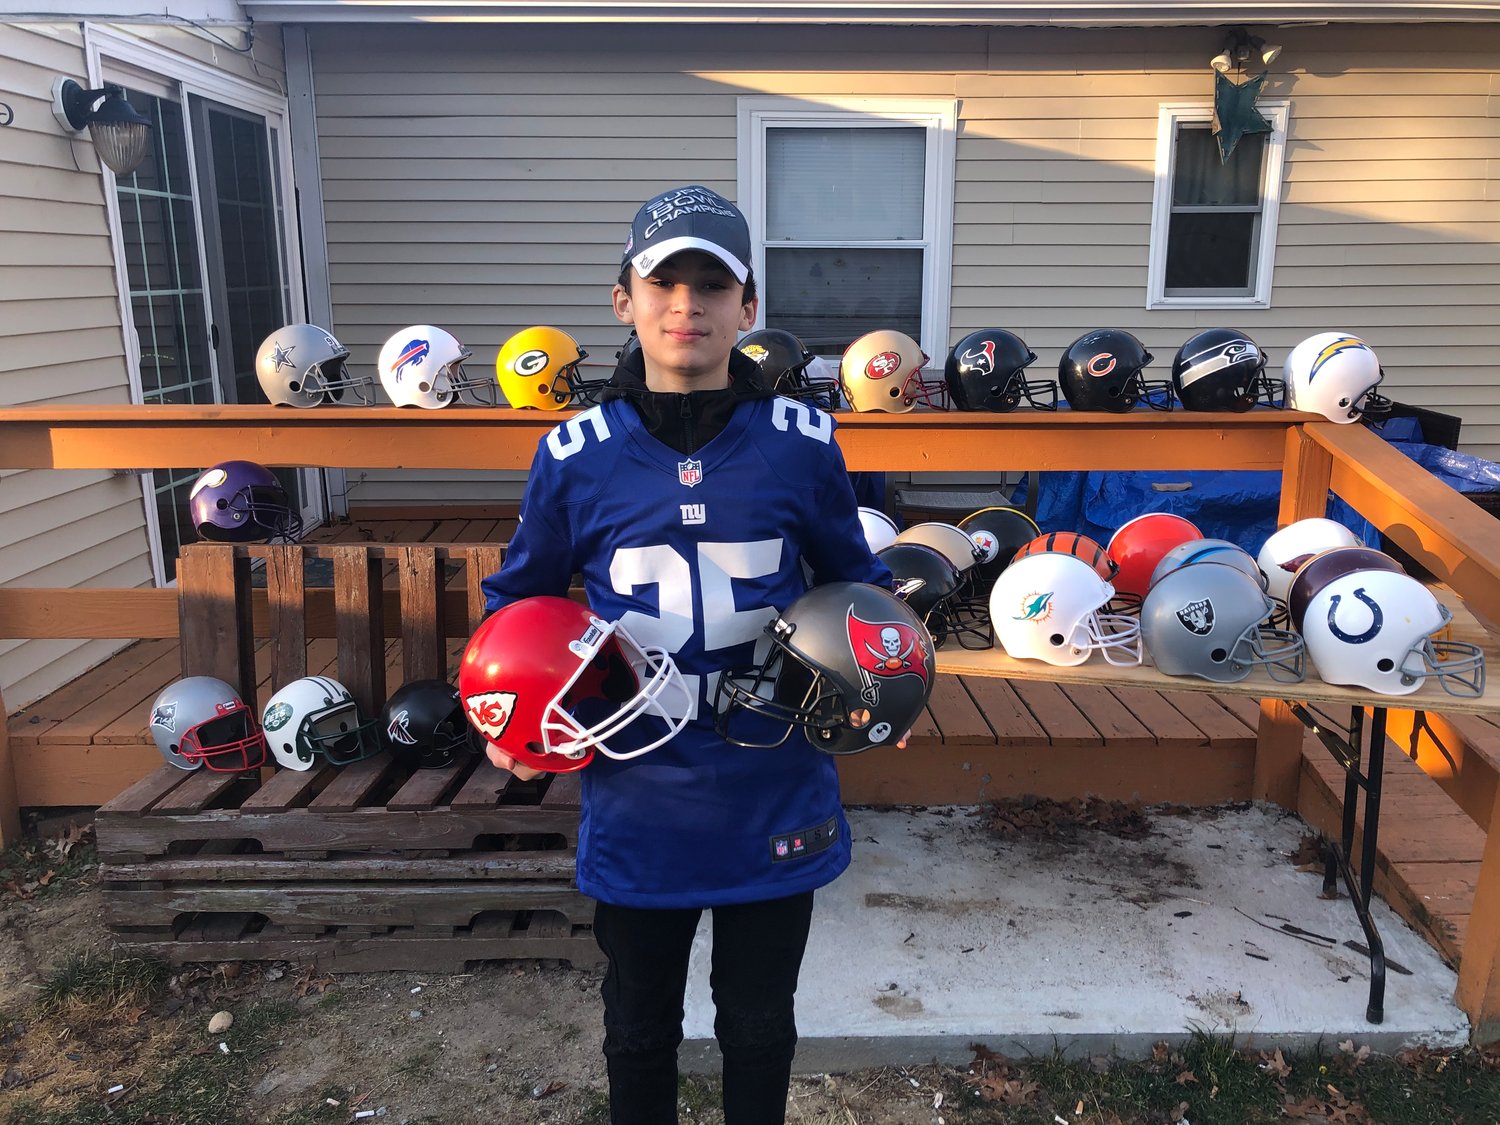 Donovan with his helmet collection holding this year’s Super Bowl teams, the Buccaneers and the Chiefs.